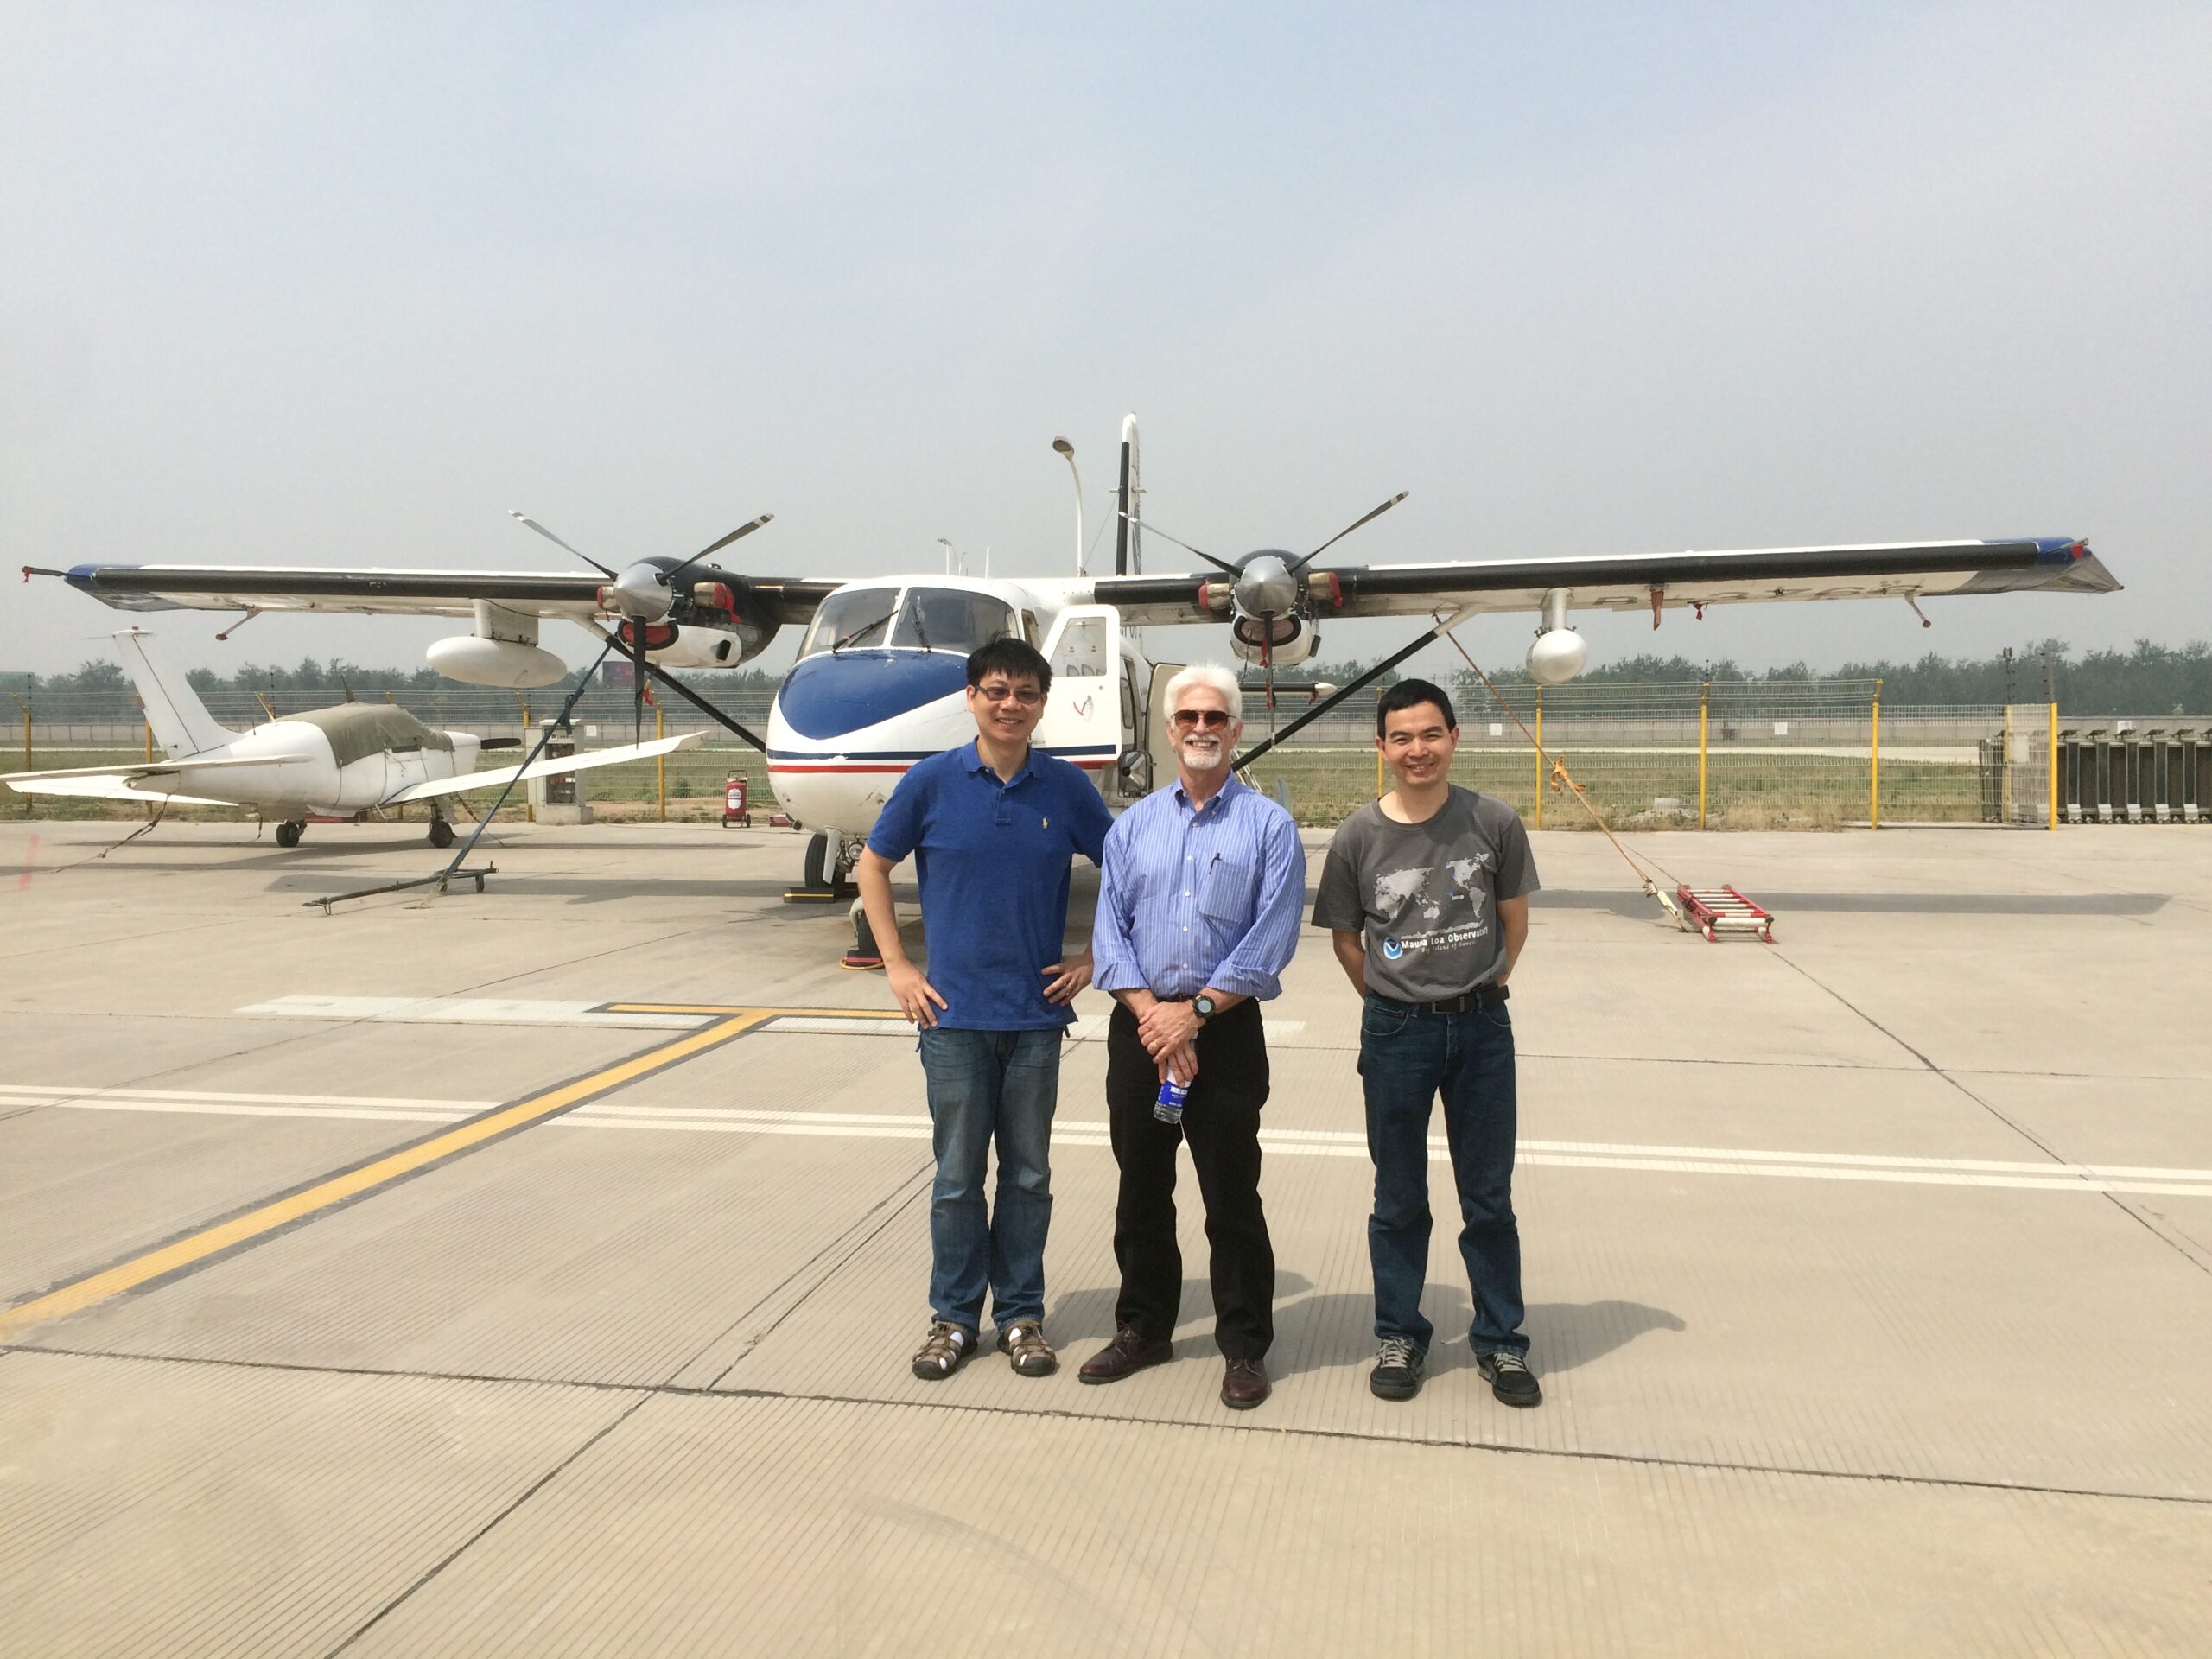 The researchers smile in front of a plane